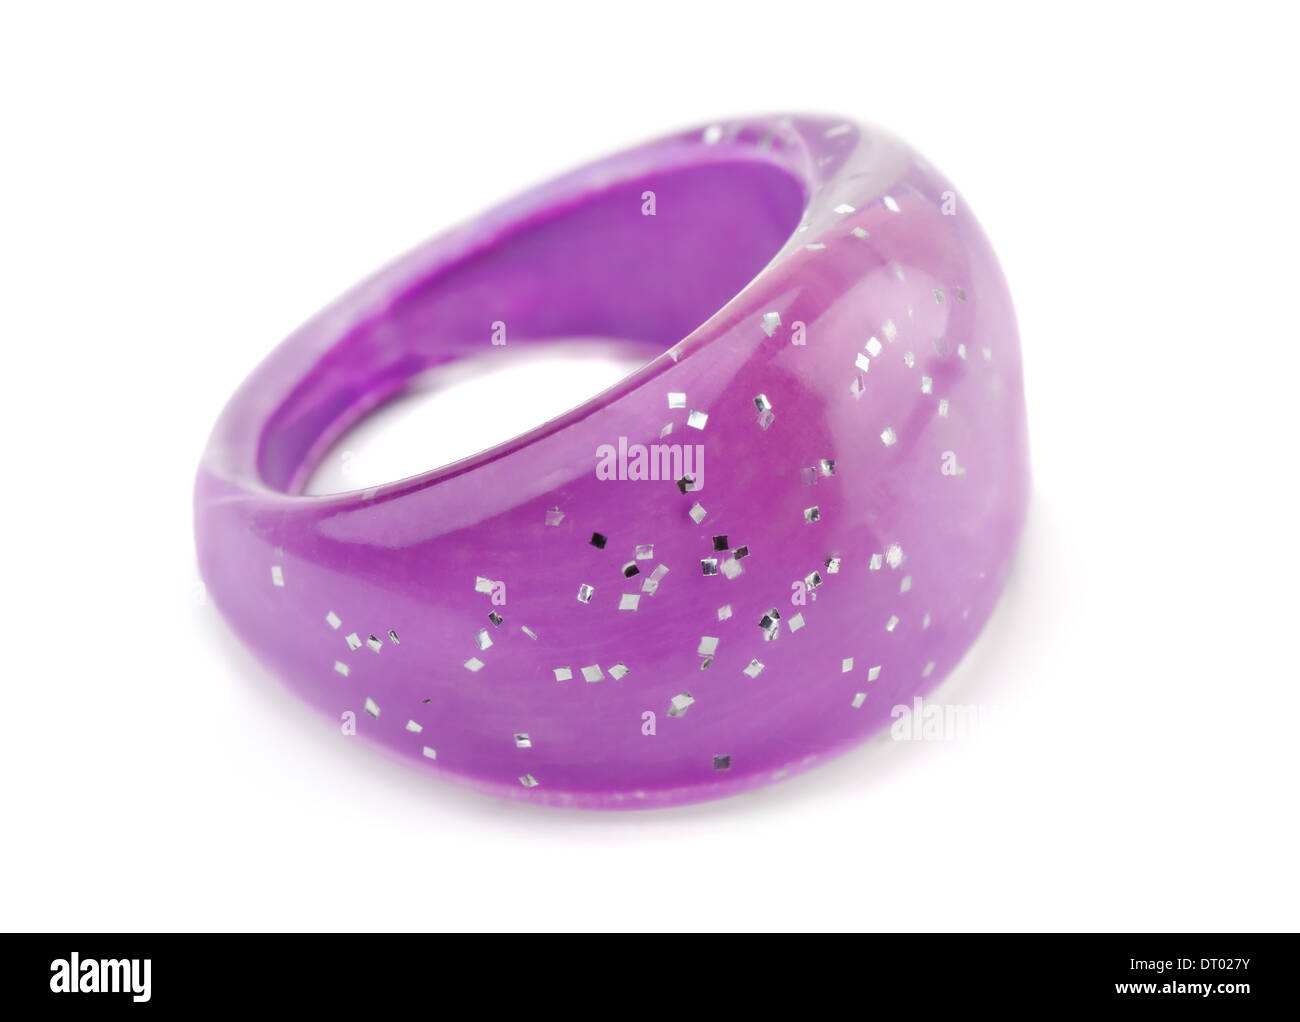 Pink plastic finger ring isolated on white Stock Photo